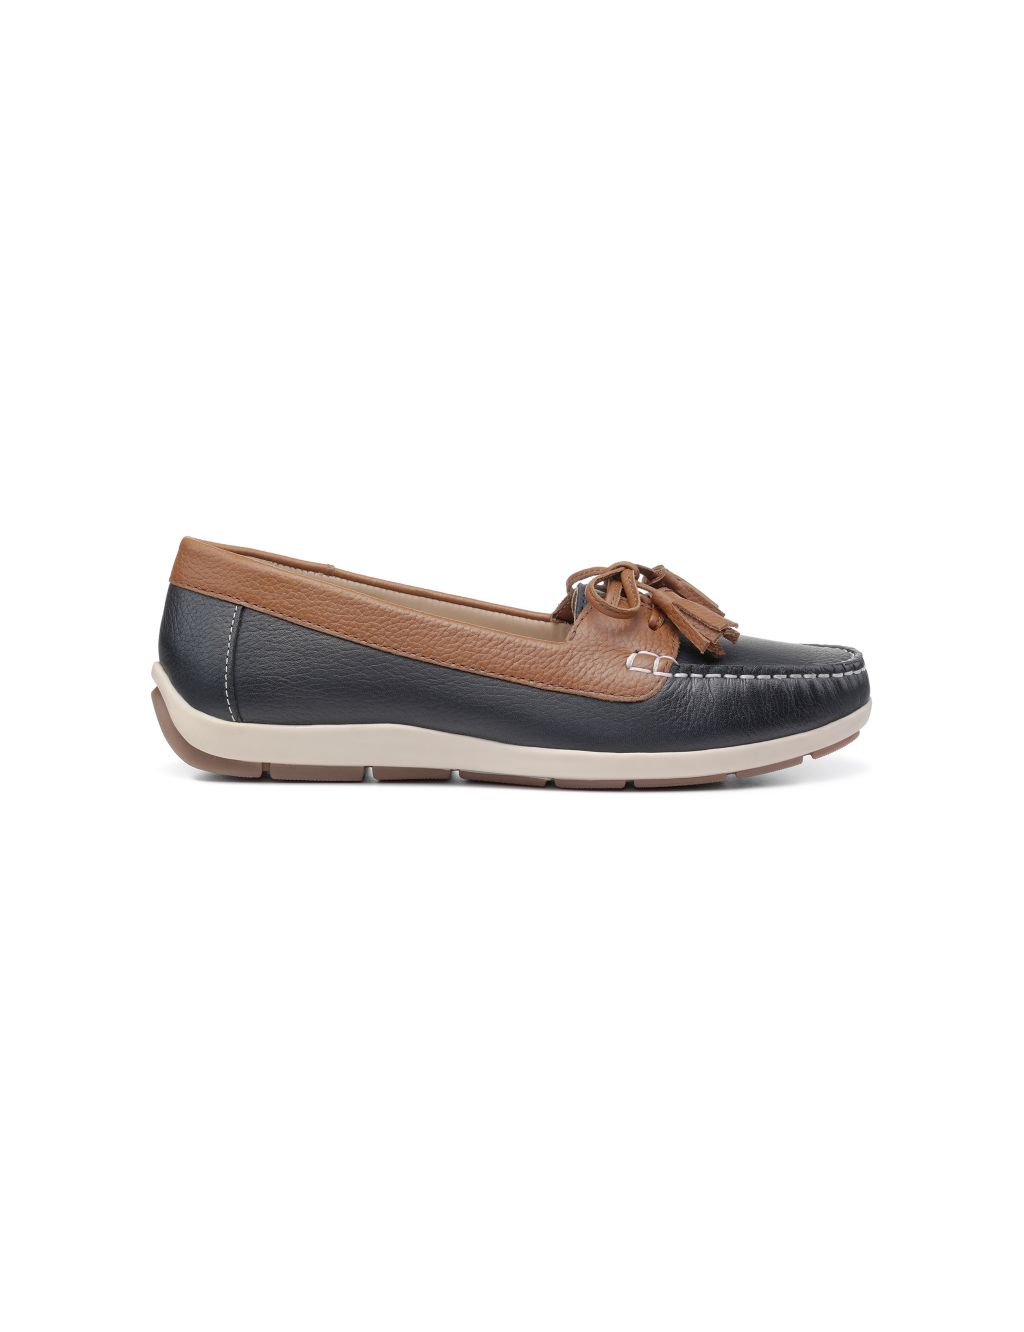 Bay Wide Fit Slip On Flat Loafers